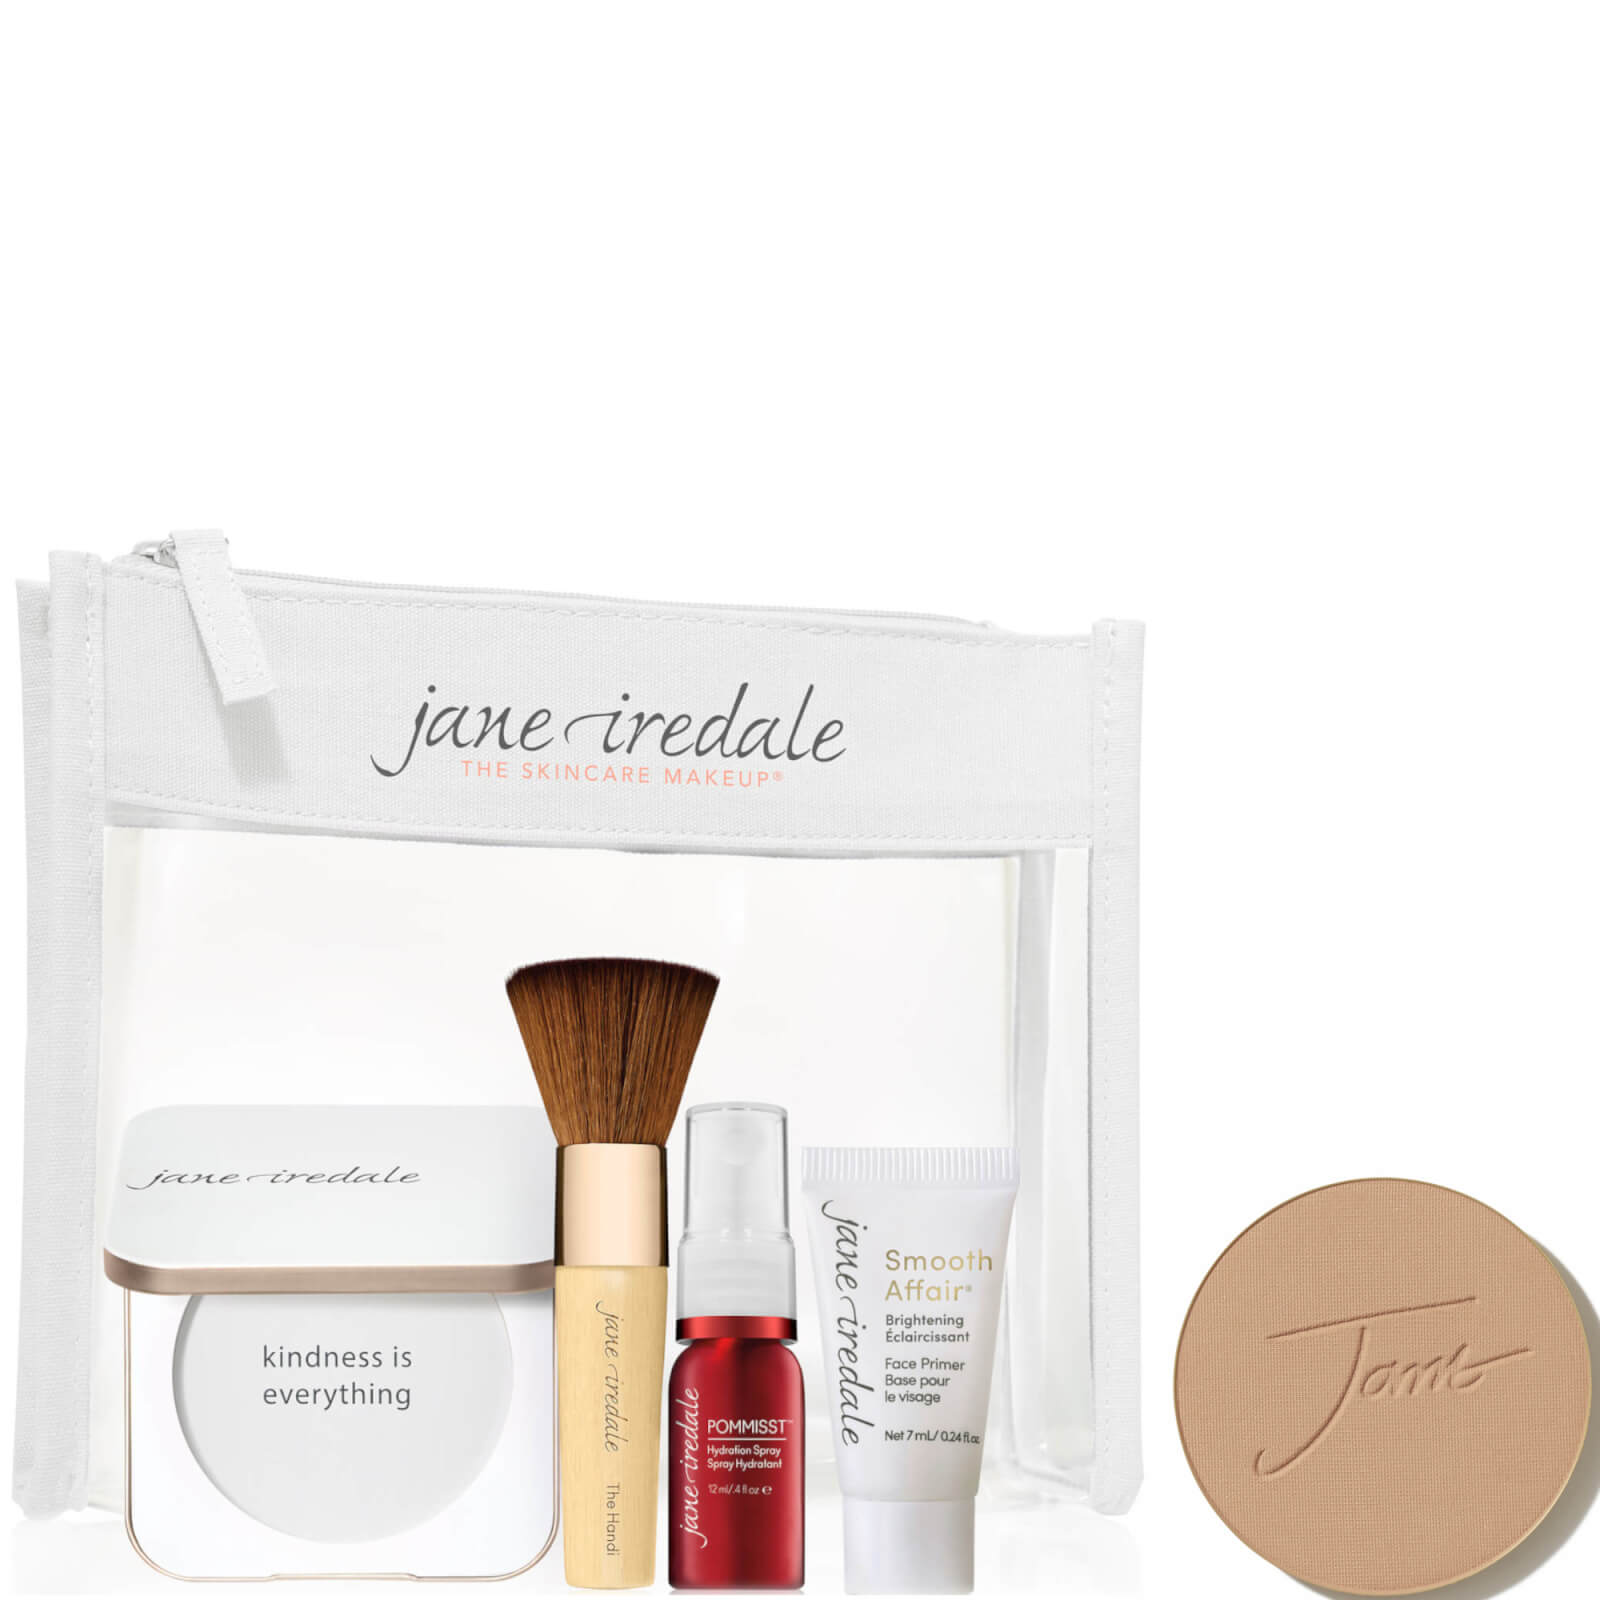 Jane Iredale The Skincare Makeup System Essentials And Purepressed Mineral Foundation Bundle (various Shades) (wo In Teakwood